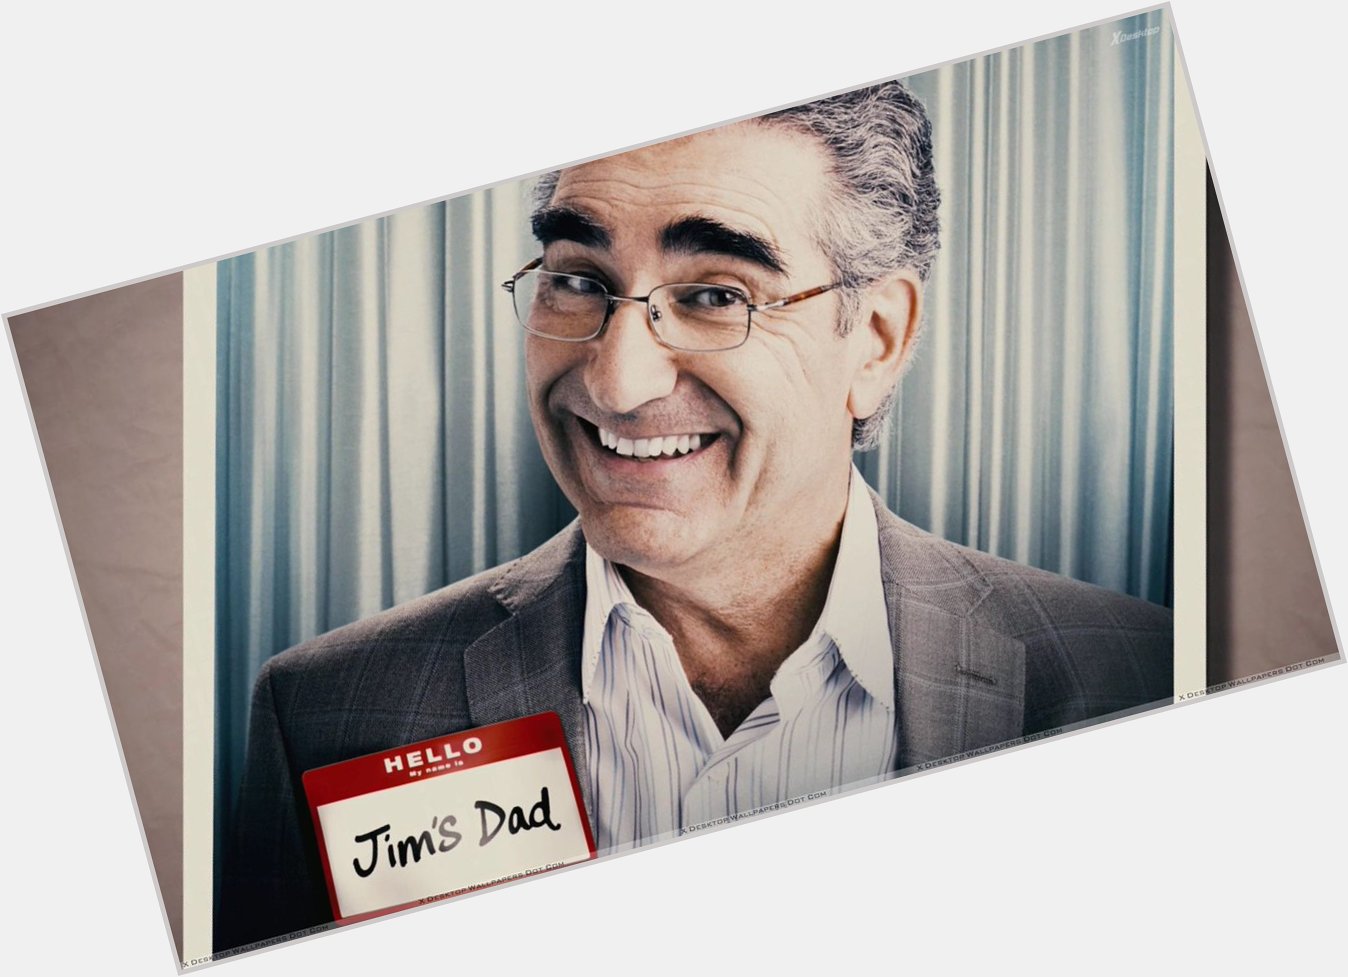 Psst, Jim\s dad from Eugene Levy, turns 69 today. Happy bday! 